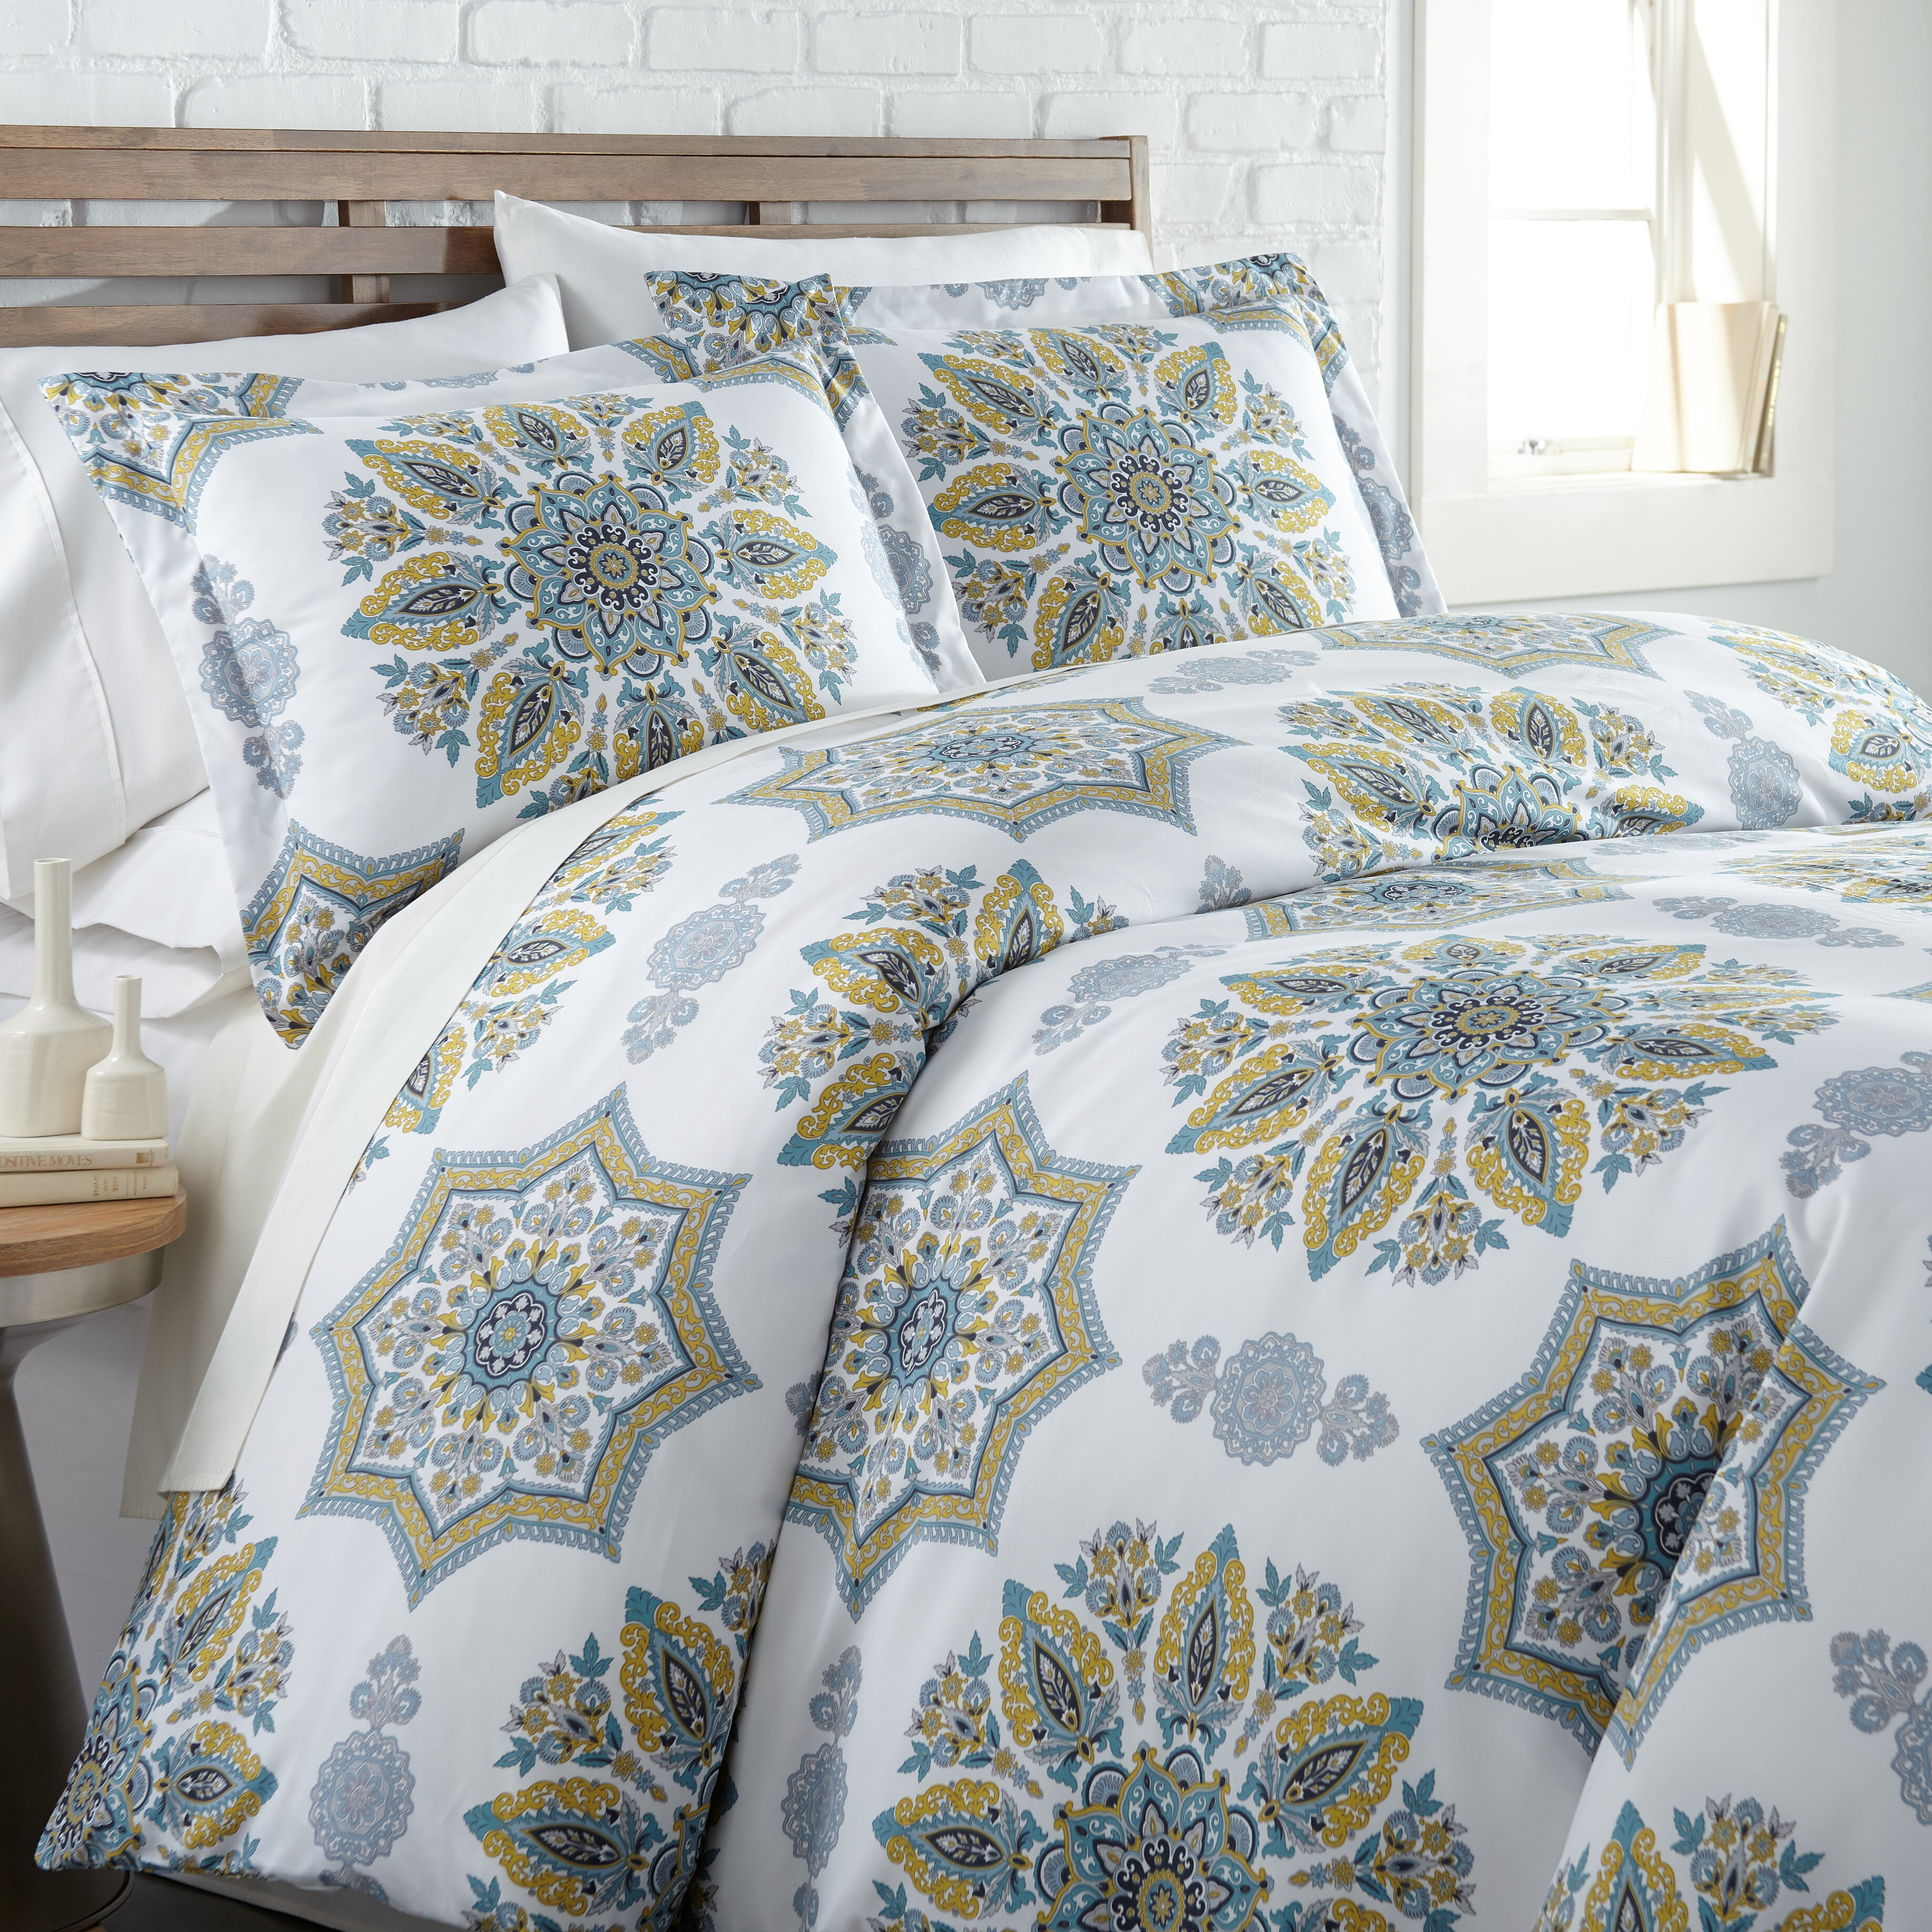 Luxury Embroidery Bedding Sets Elena Marie Quilt Duvet Covers